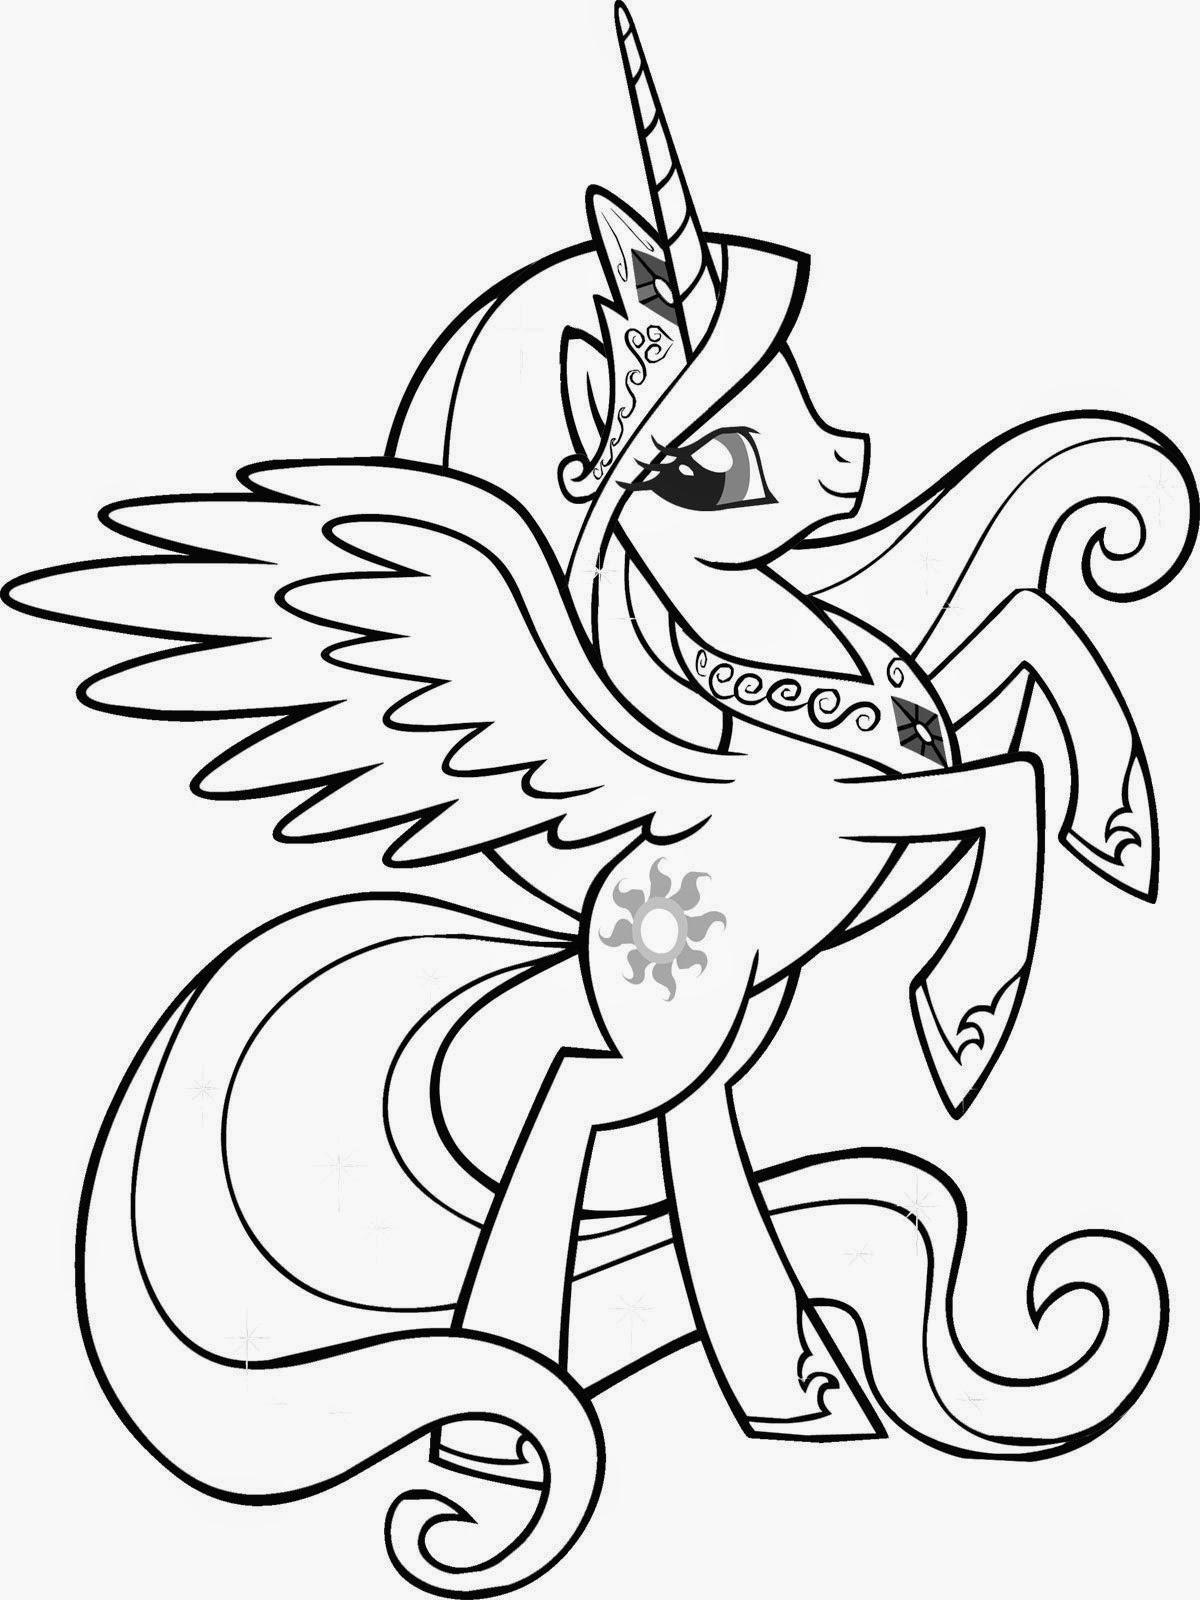 coloring page unicorn unicorn colouring pages just colorings unicorn coloring page 